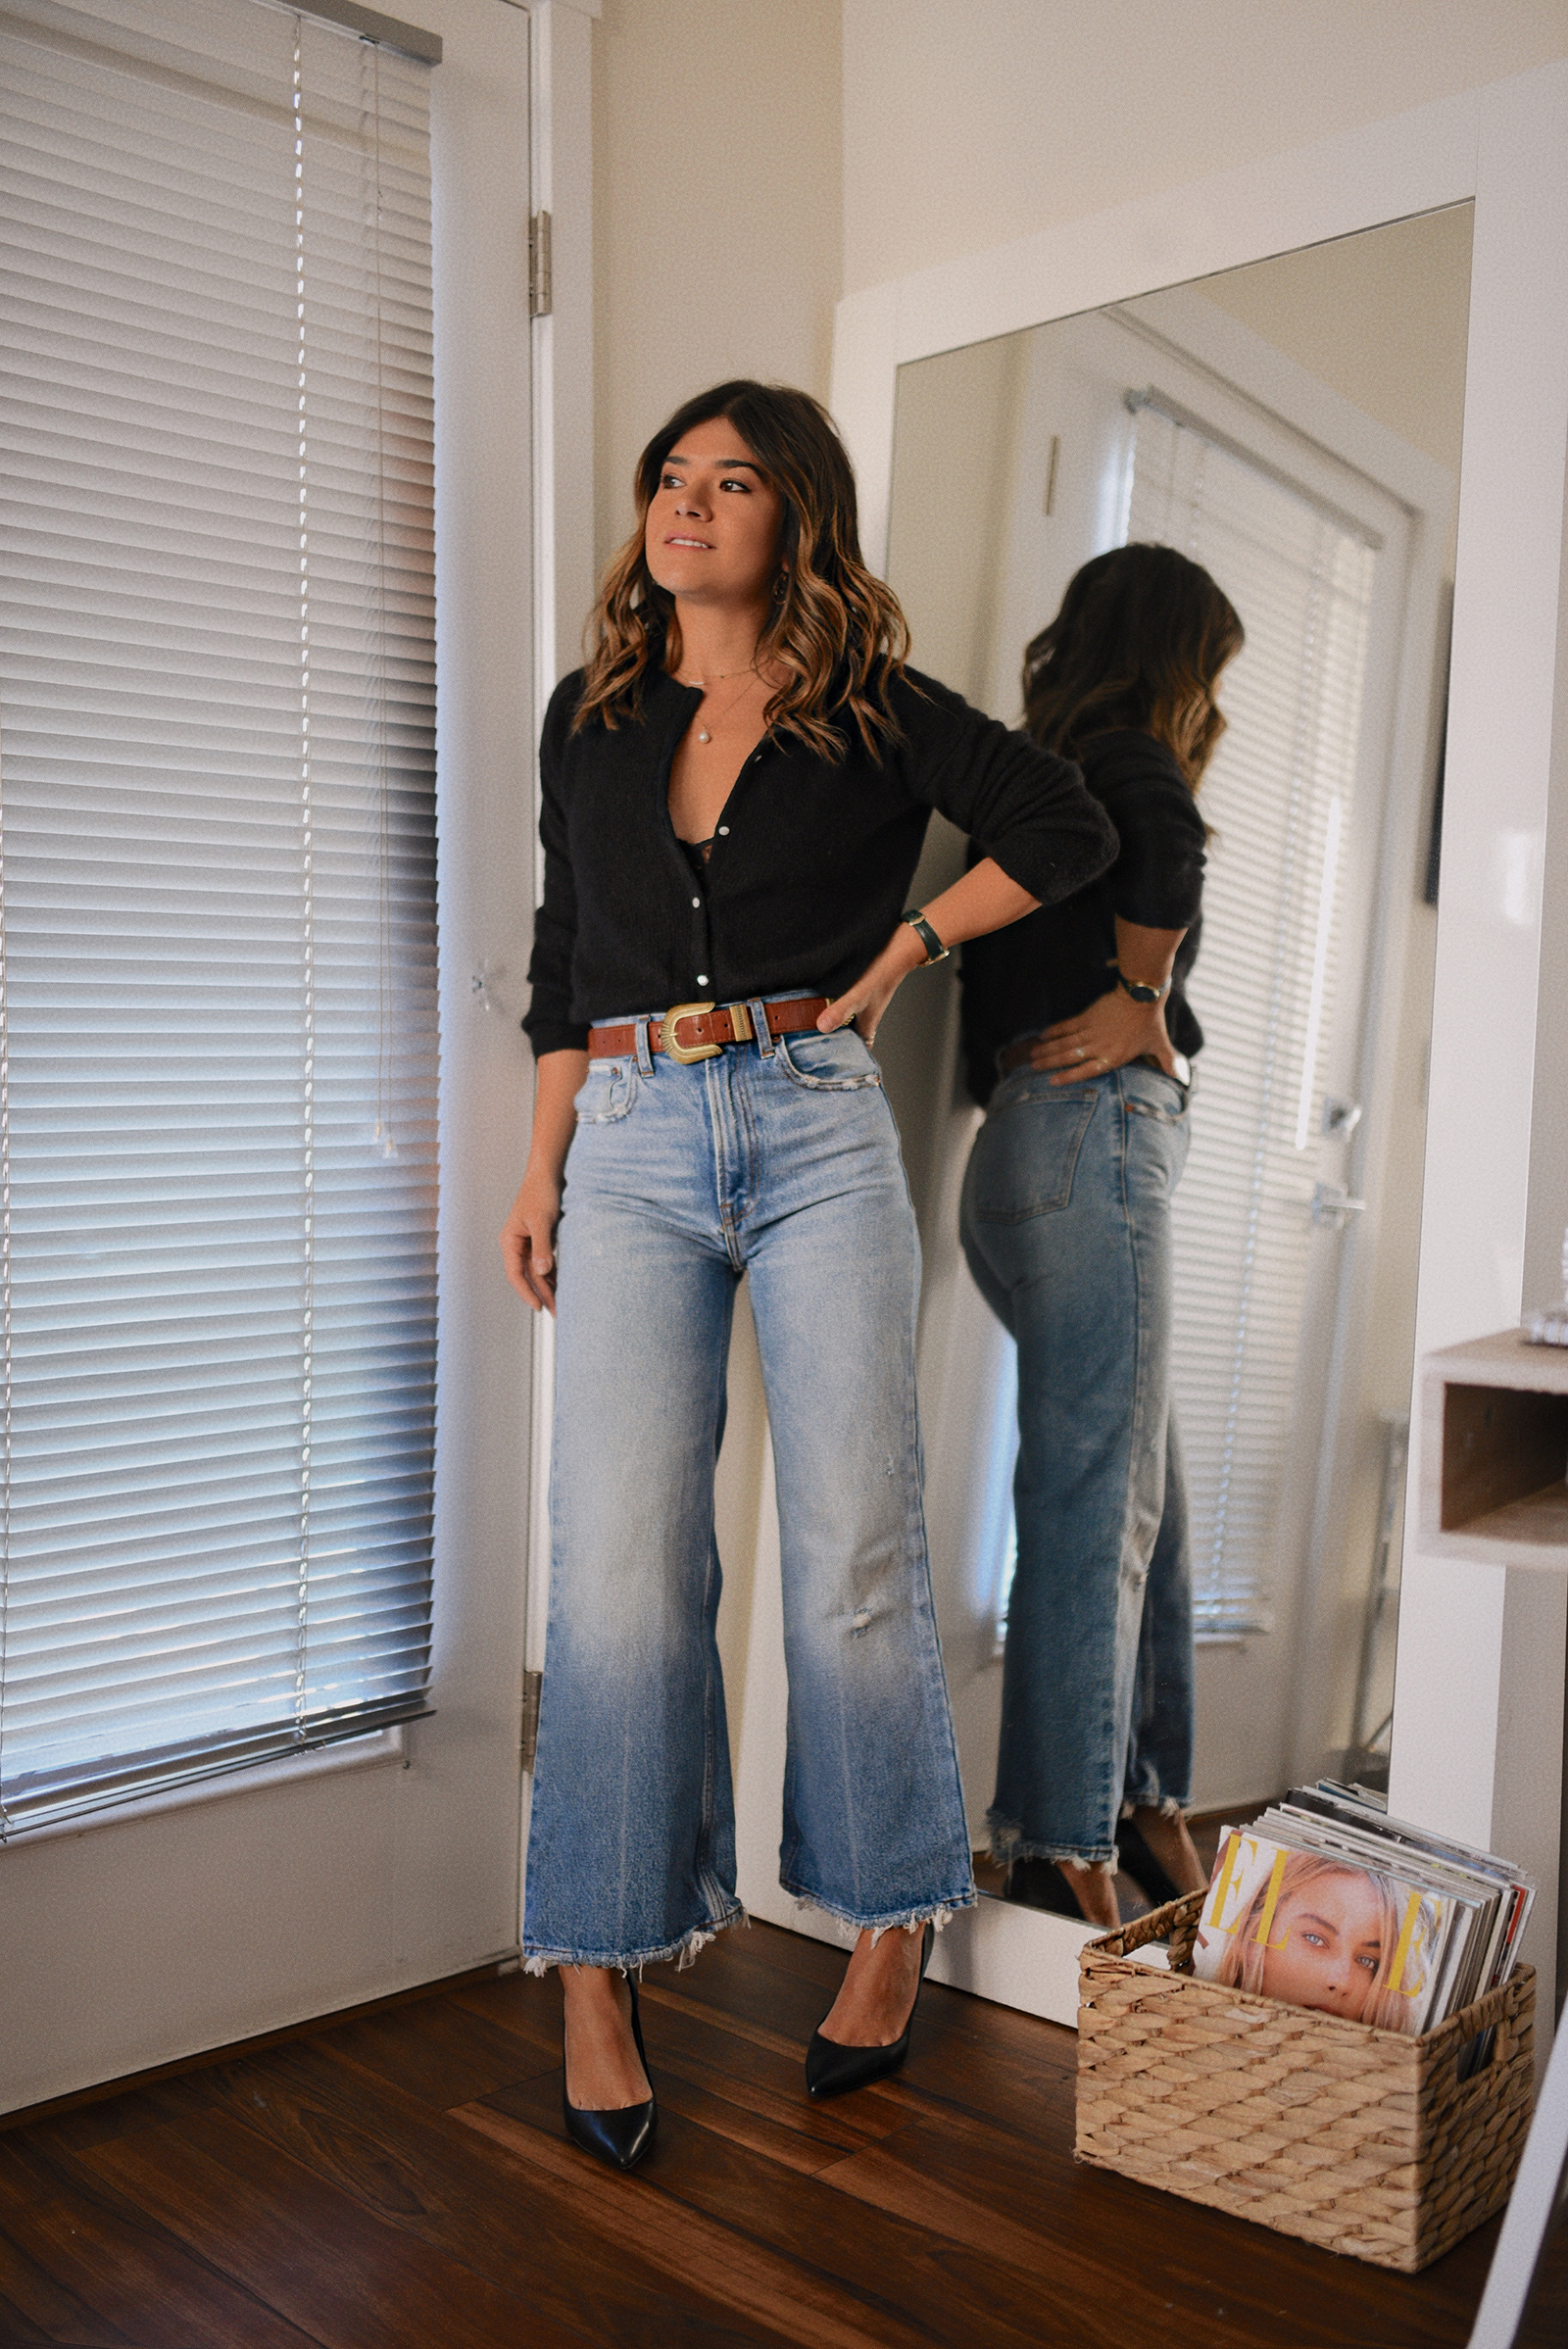 CAROLINA HELLAL FROM CHIC TALK WEARING A BLACK SHIRT, WIDE LEG JEANS AND LEATHER PUMPS